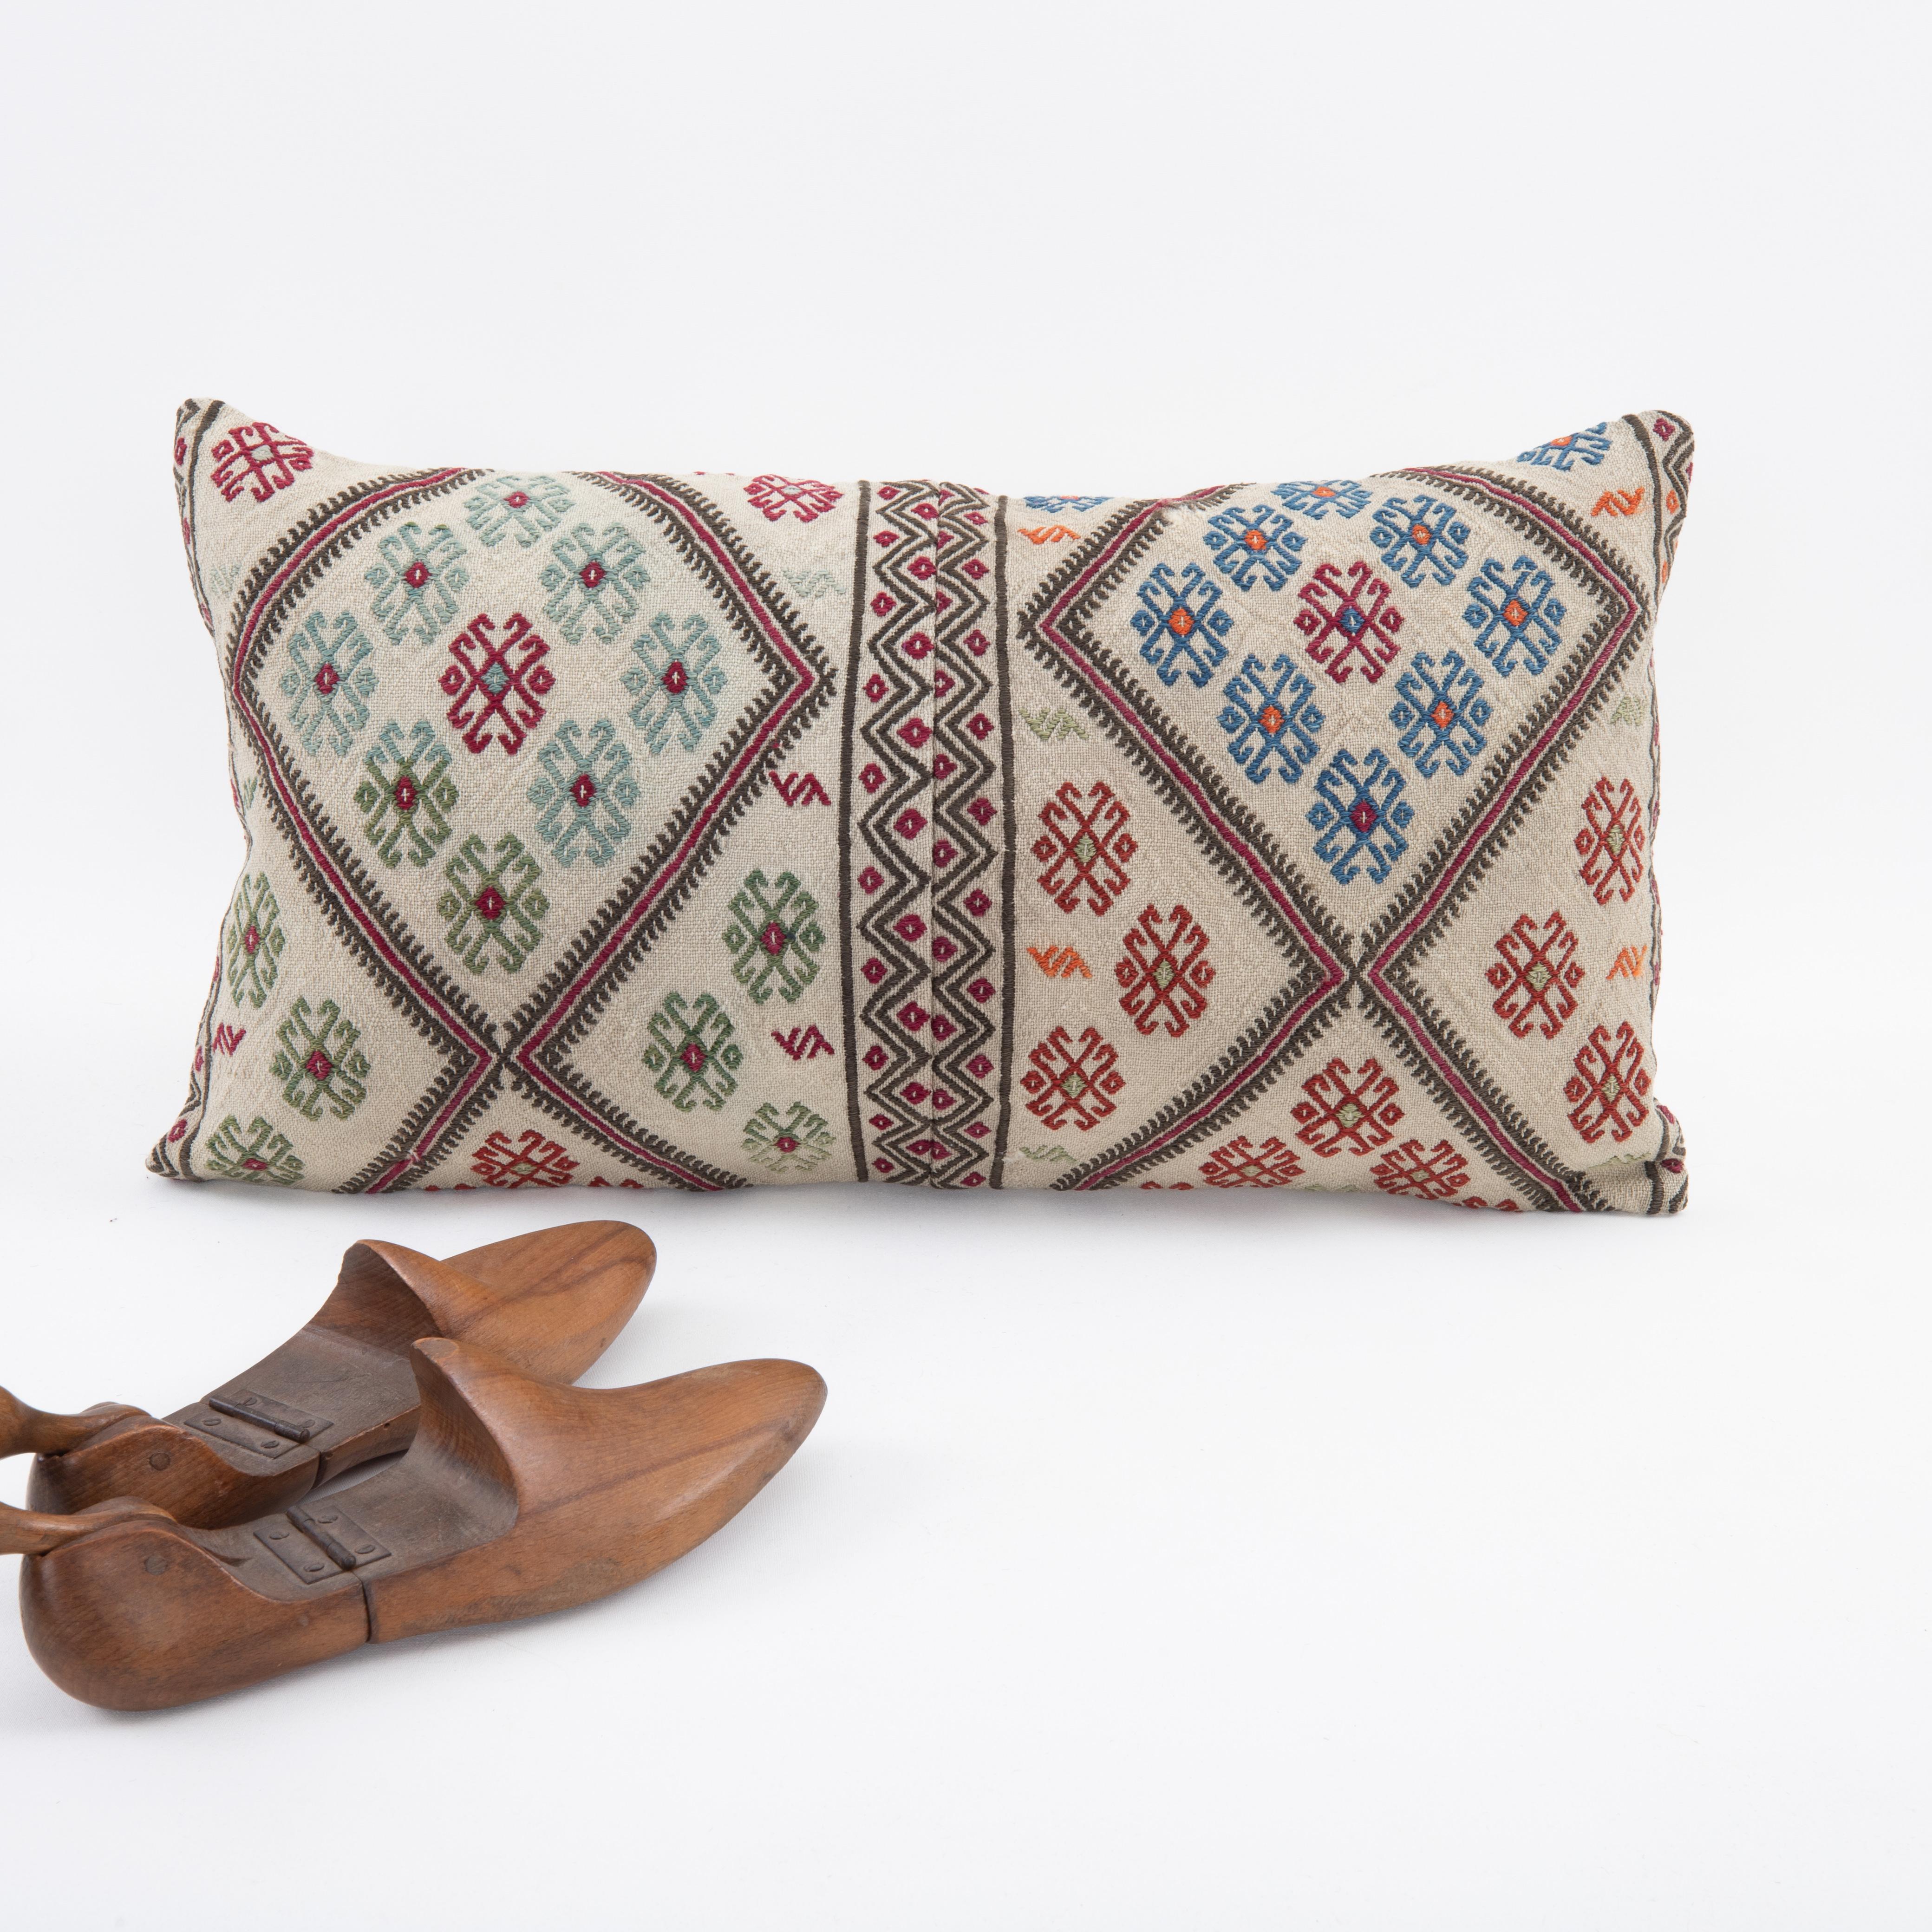 Hand-Woven Pillow Case Made from an Antique Anatolian Cicim Rug